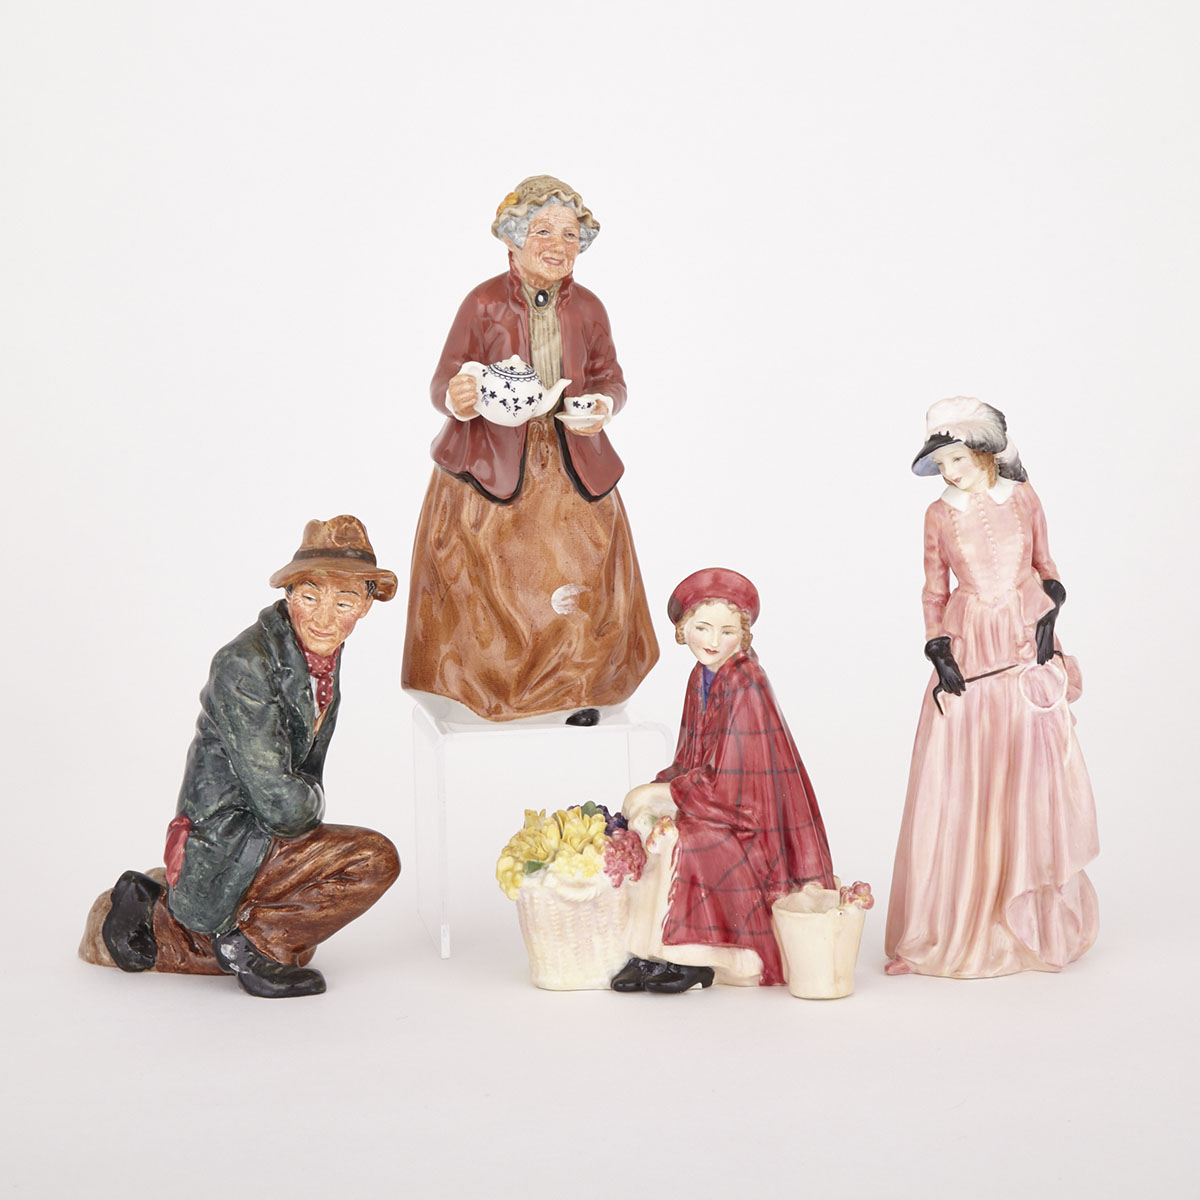 Group of Four Royal Doulton Figurines, 20th century